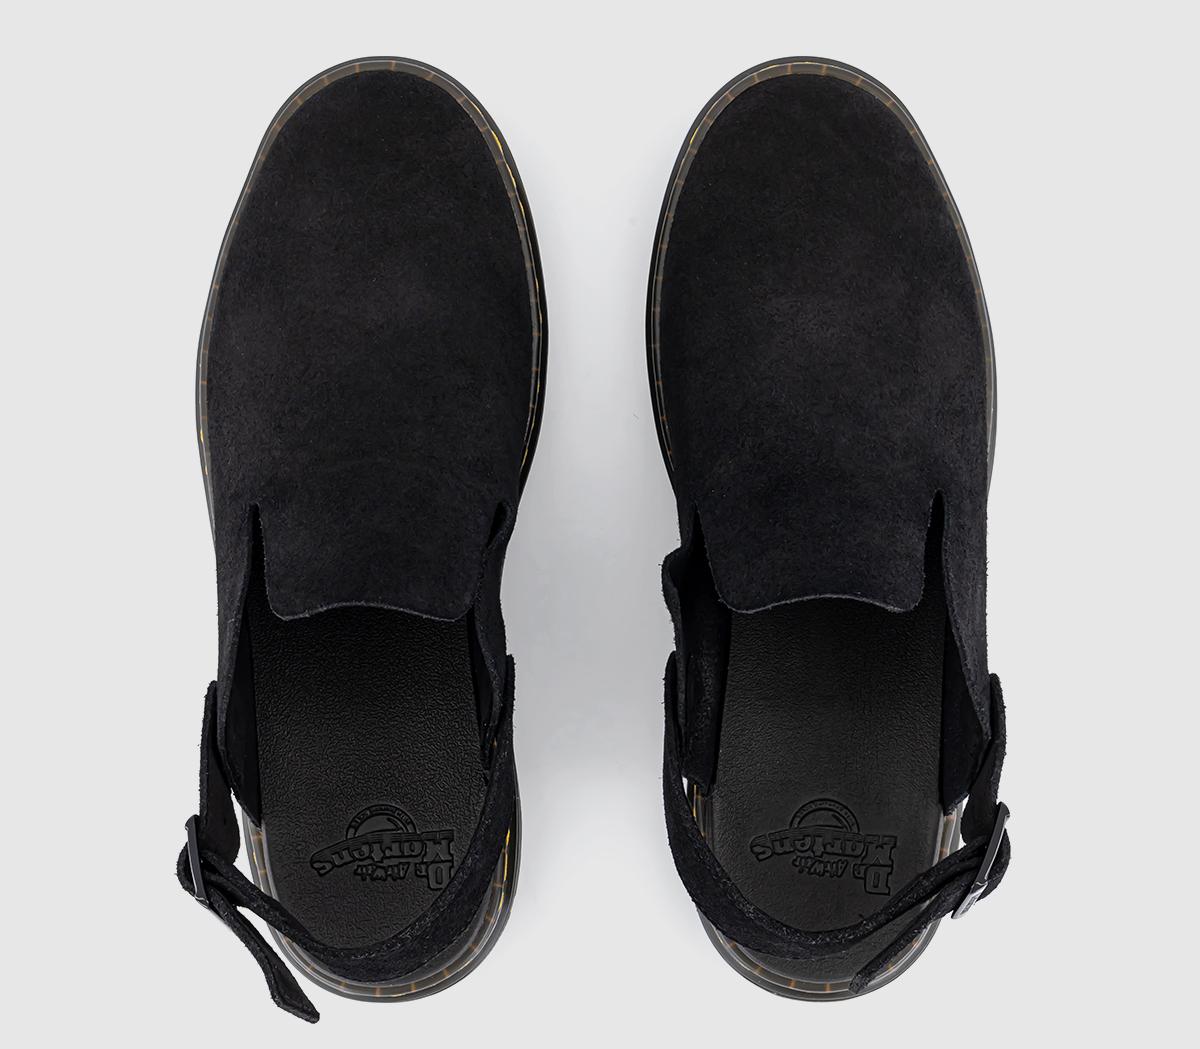 Dr. Martens Carlson Mules Black Eh Suede Mb - Men's Casual Shoes